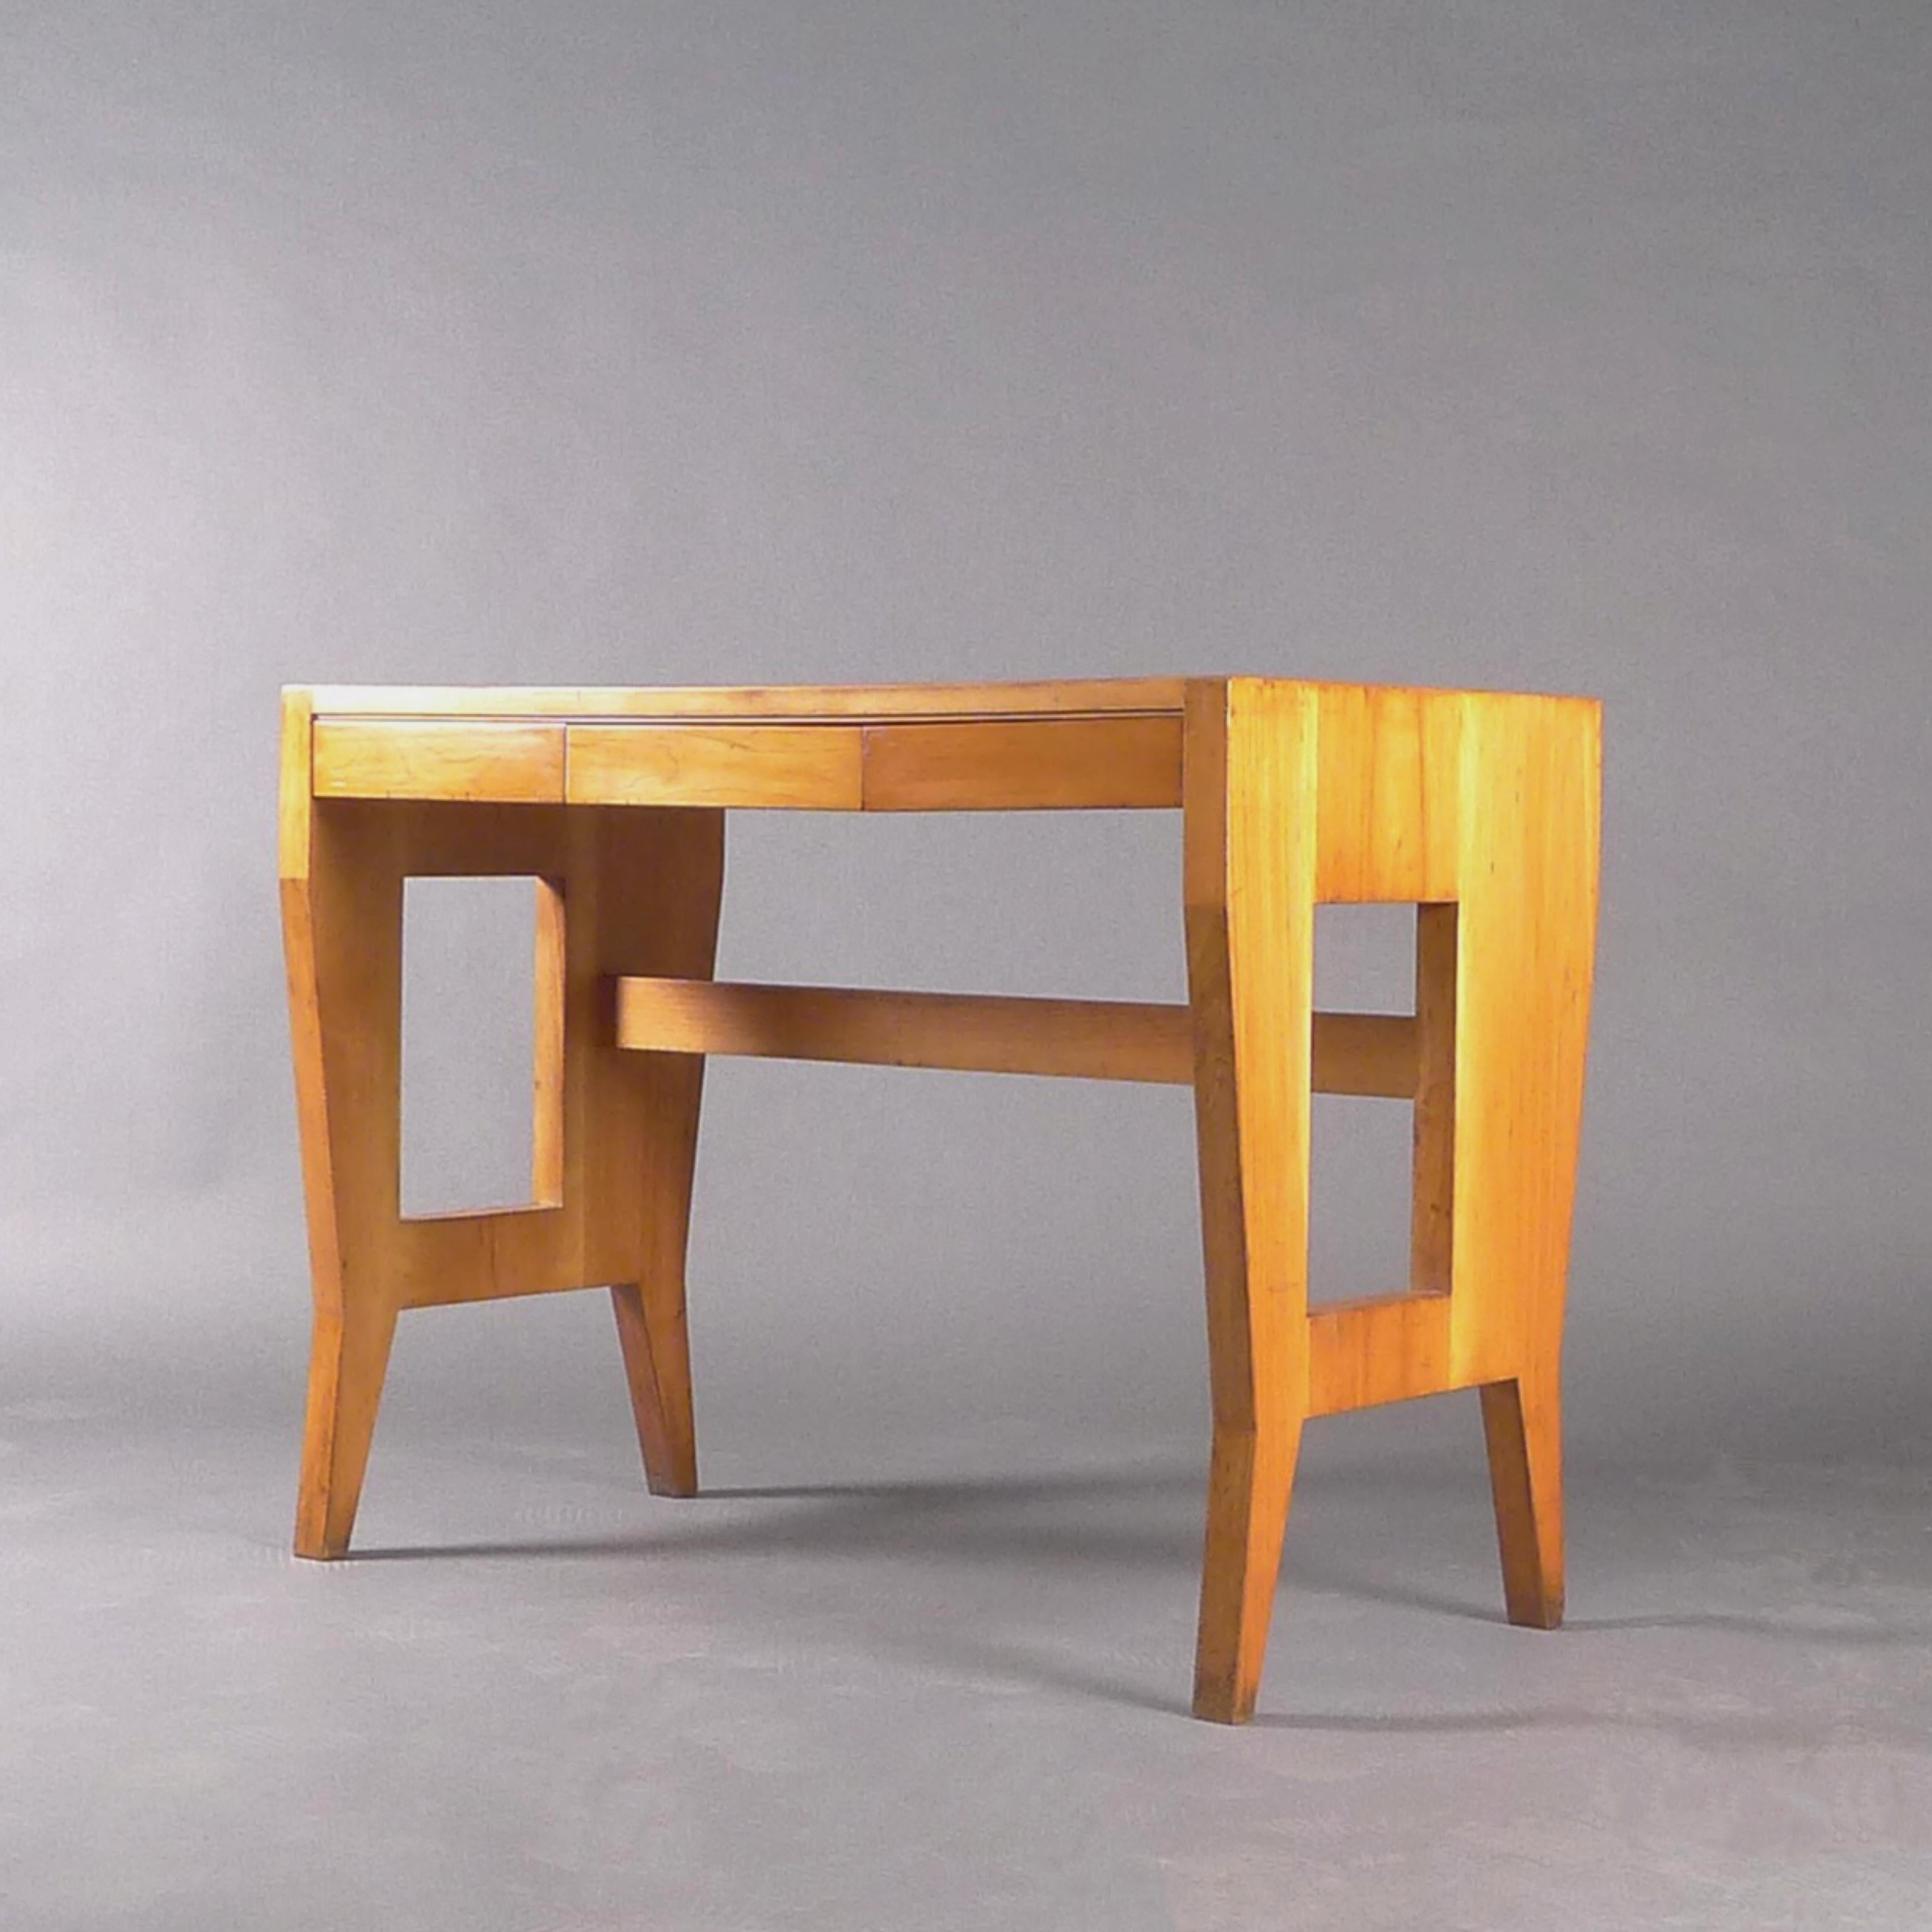 Gio Ponti small desk in light walnut on shaped tapering legs united by stretchers.  The wood is in excellent condition with beautiful graining to the planked top, and the three frieze drawers to the front slide smoothly.

140cm wide, 70cm deep, 80cm